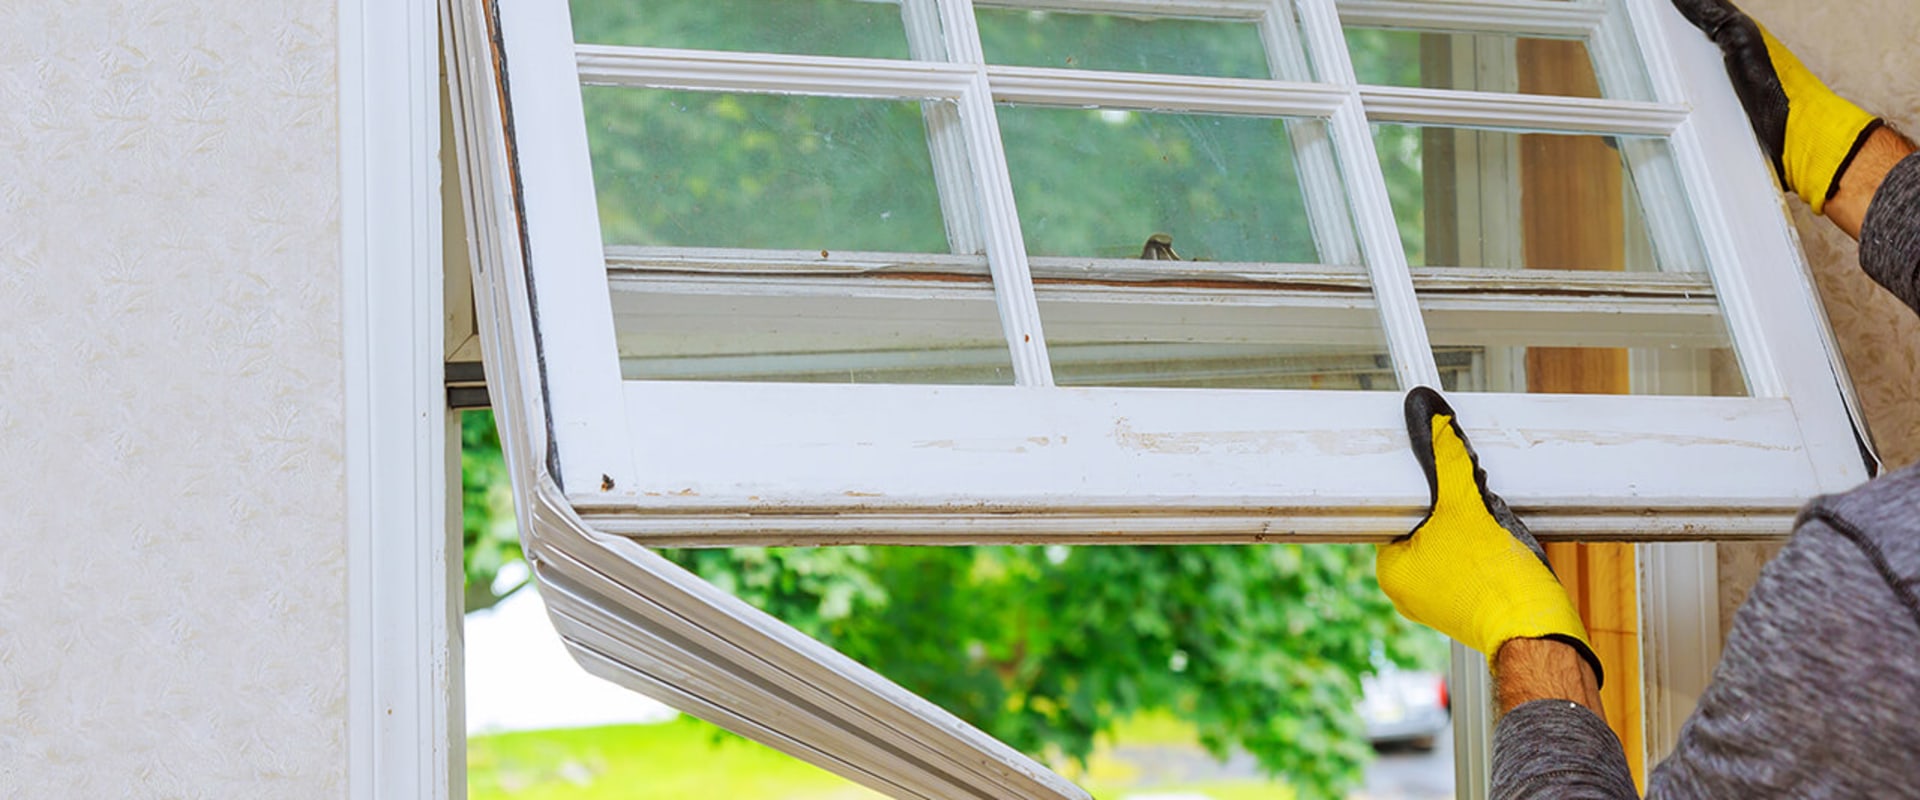 How Much Does It Cost to Replace a Window in a House?